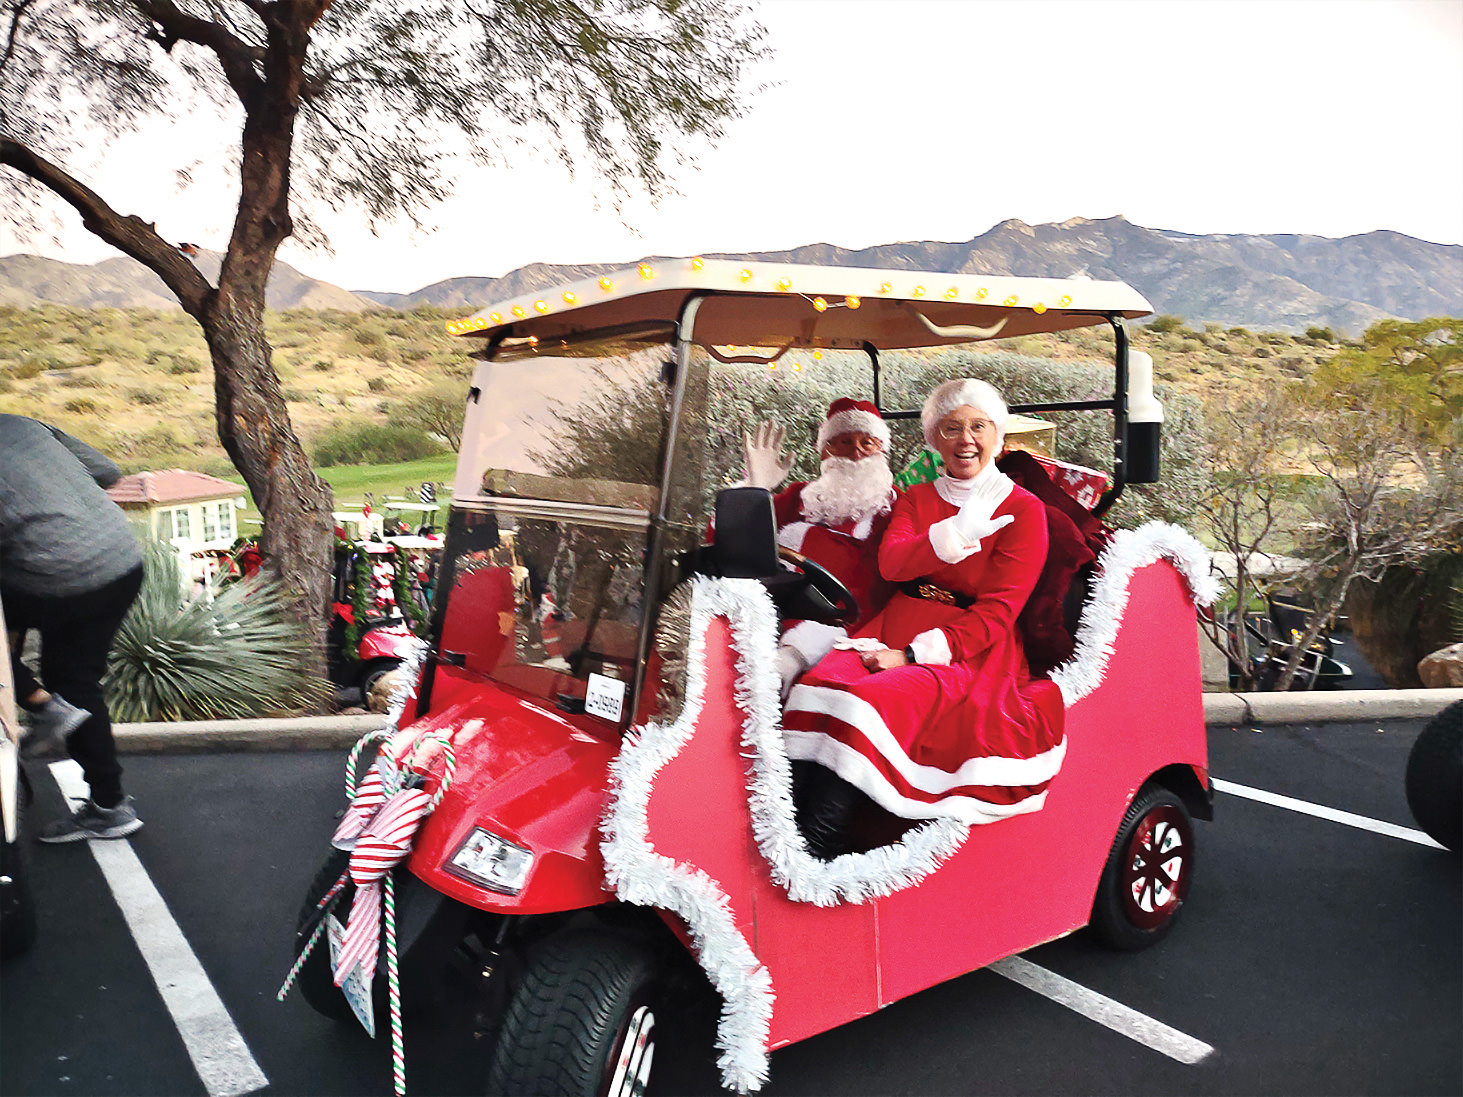 Kathy and Steve Sanchez in their winning holiday decorated golf cart (Photo by Bob Koblewski)